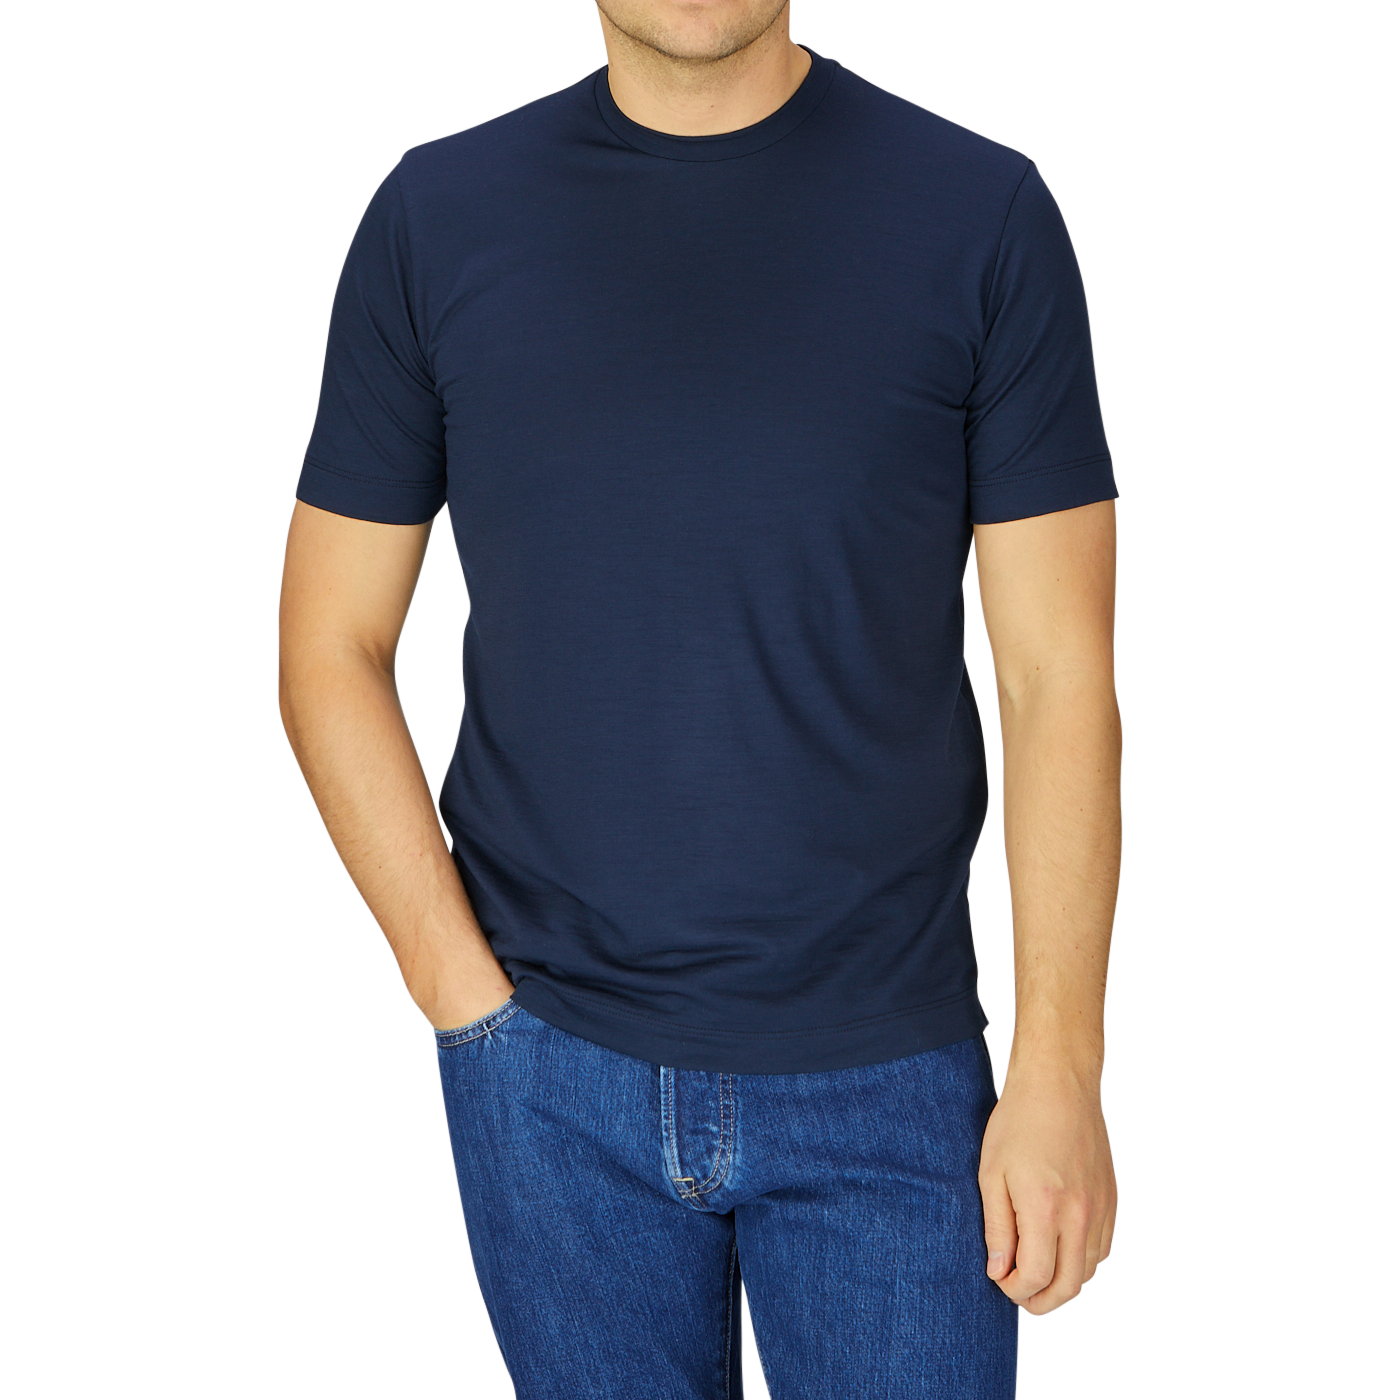 Man wearing a Mazzarelli navy blue merino wool T-shirt and blue jeans, standing with one hand slightly tucked in his pocket, against a striped grey background.